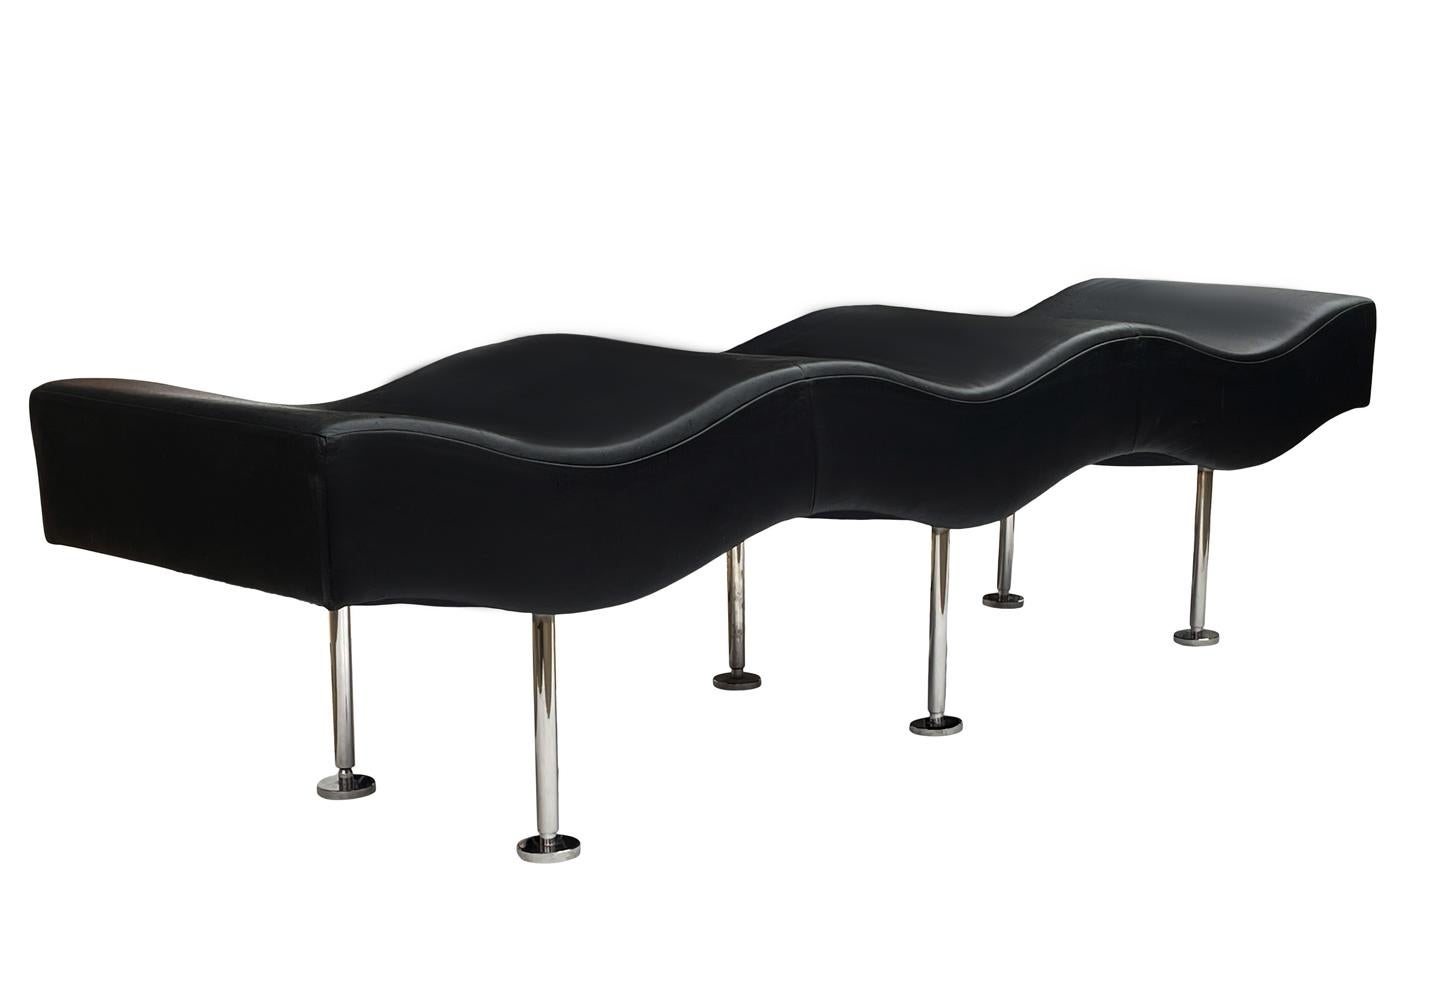 Late 20th Century Mid Century Post Modern Extra Long Black Leather Wave Bench by Breuton